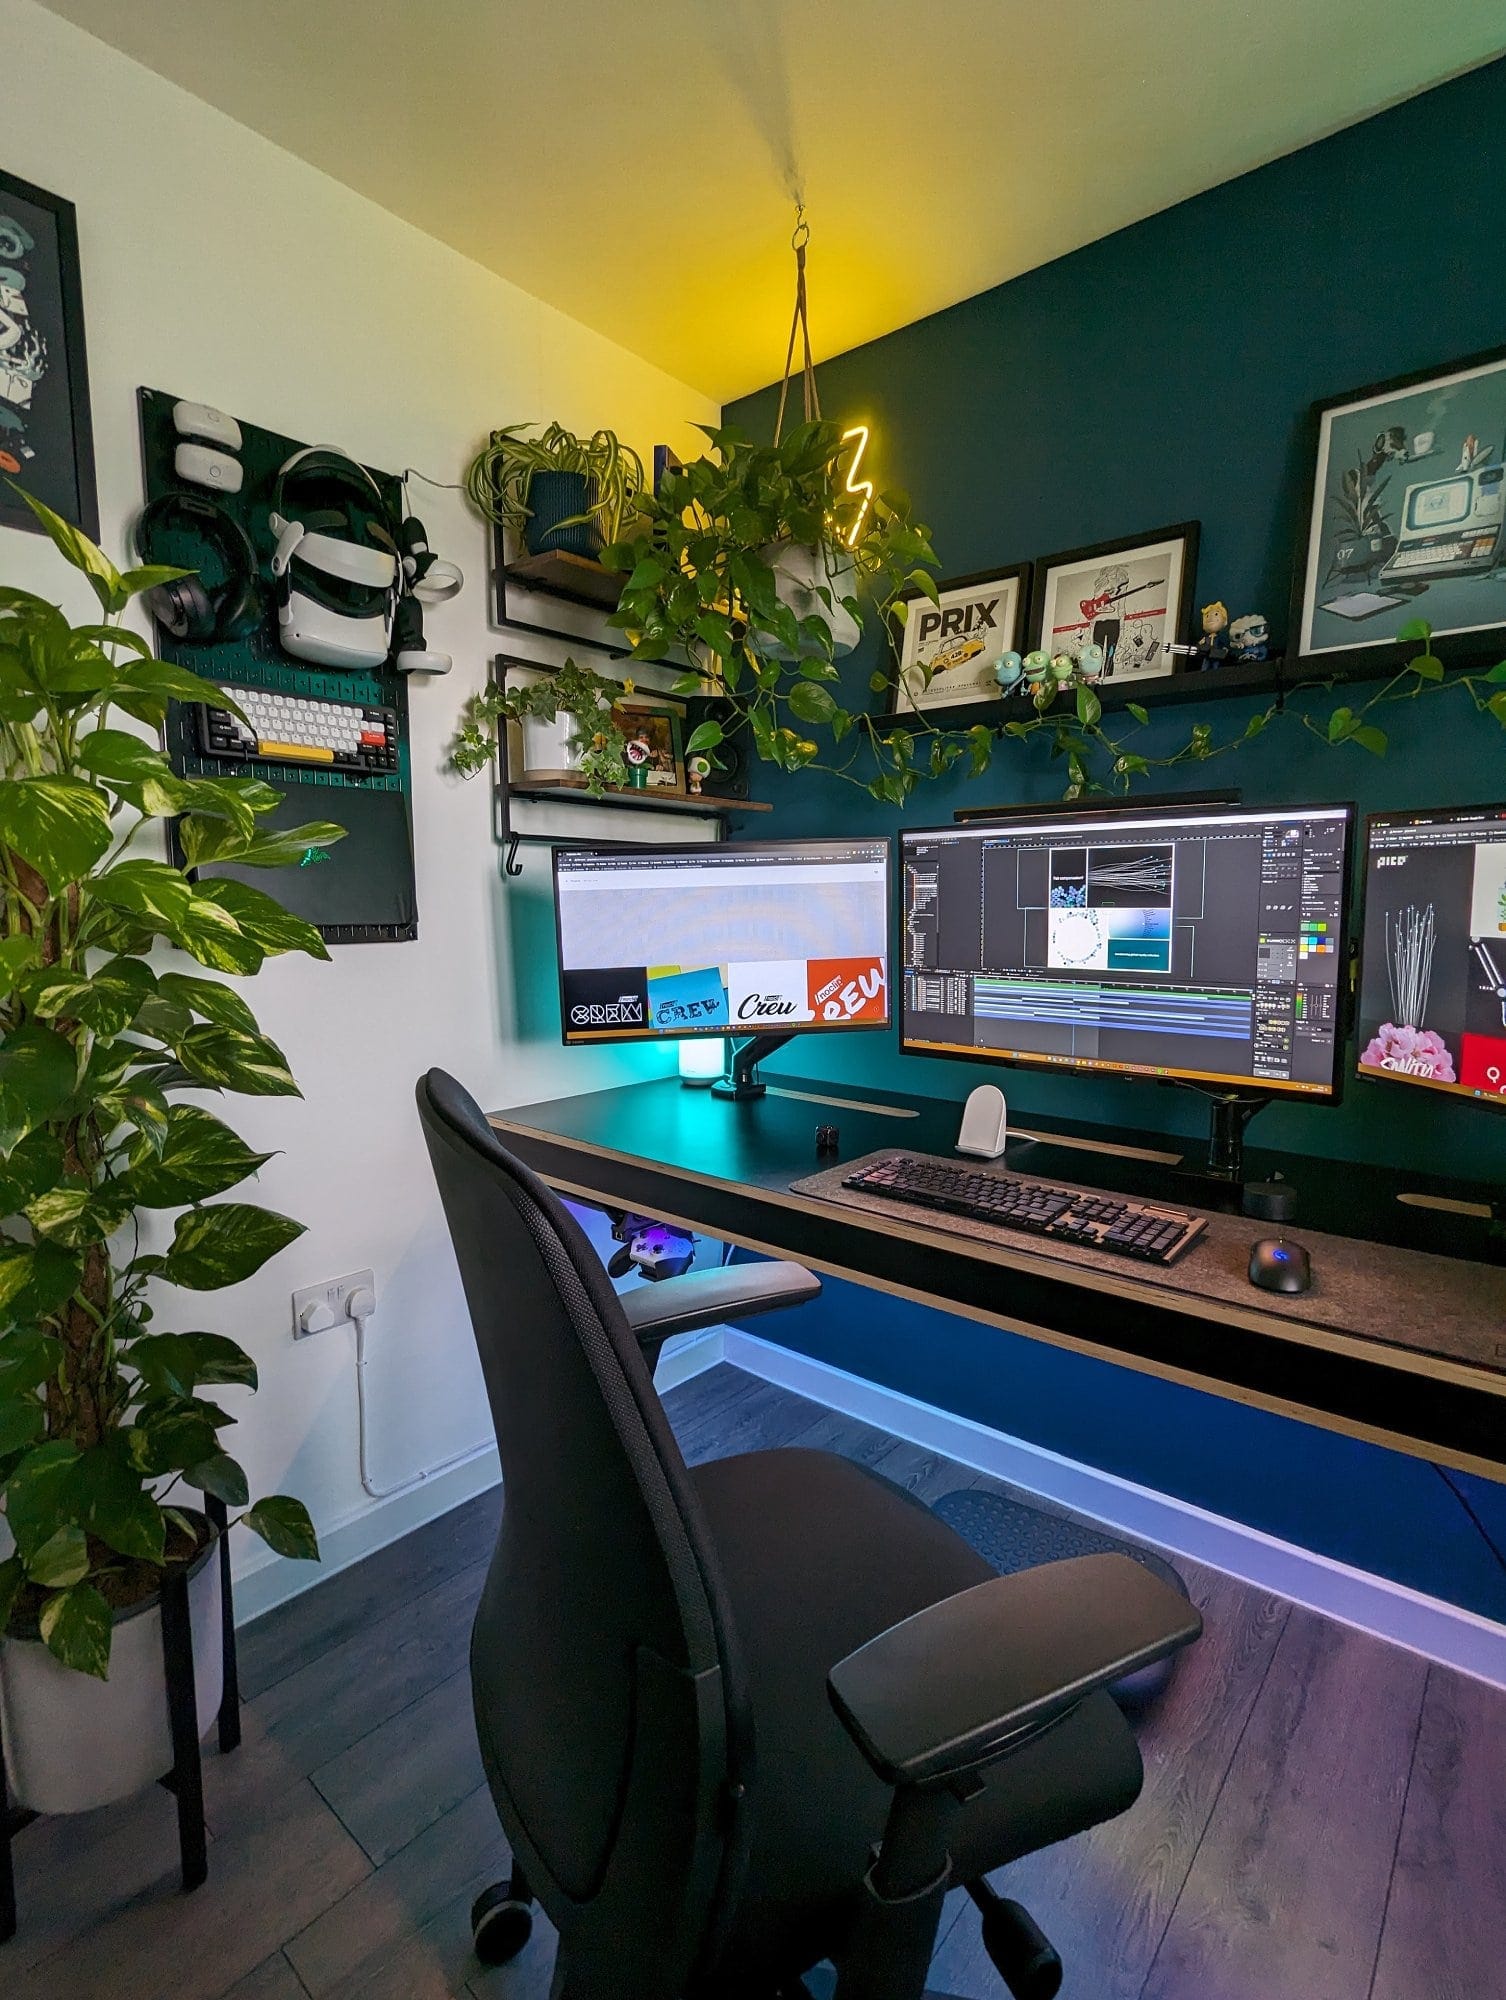 A battlestation with a multi-monitor desk setup, featuring an ergonomic chair, tech accessories, framed artwork, motivational posters, and ambient LED lighting